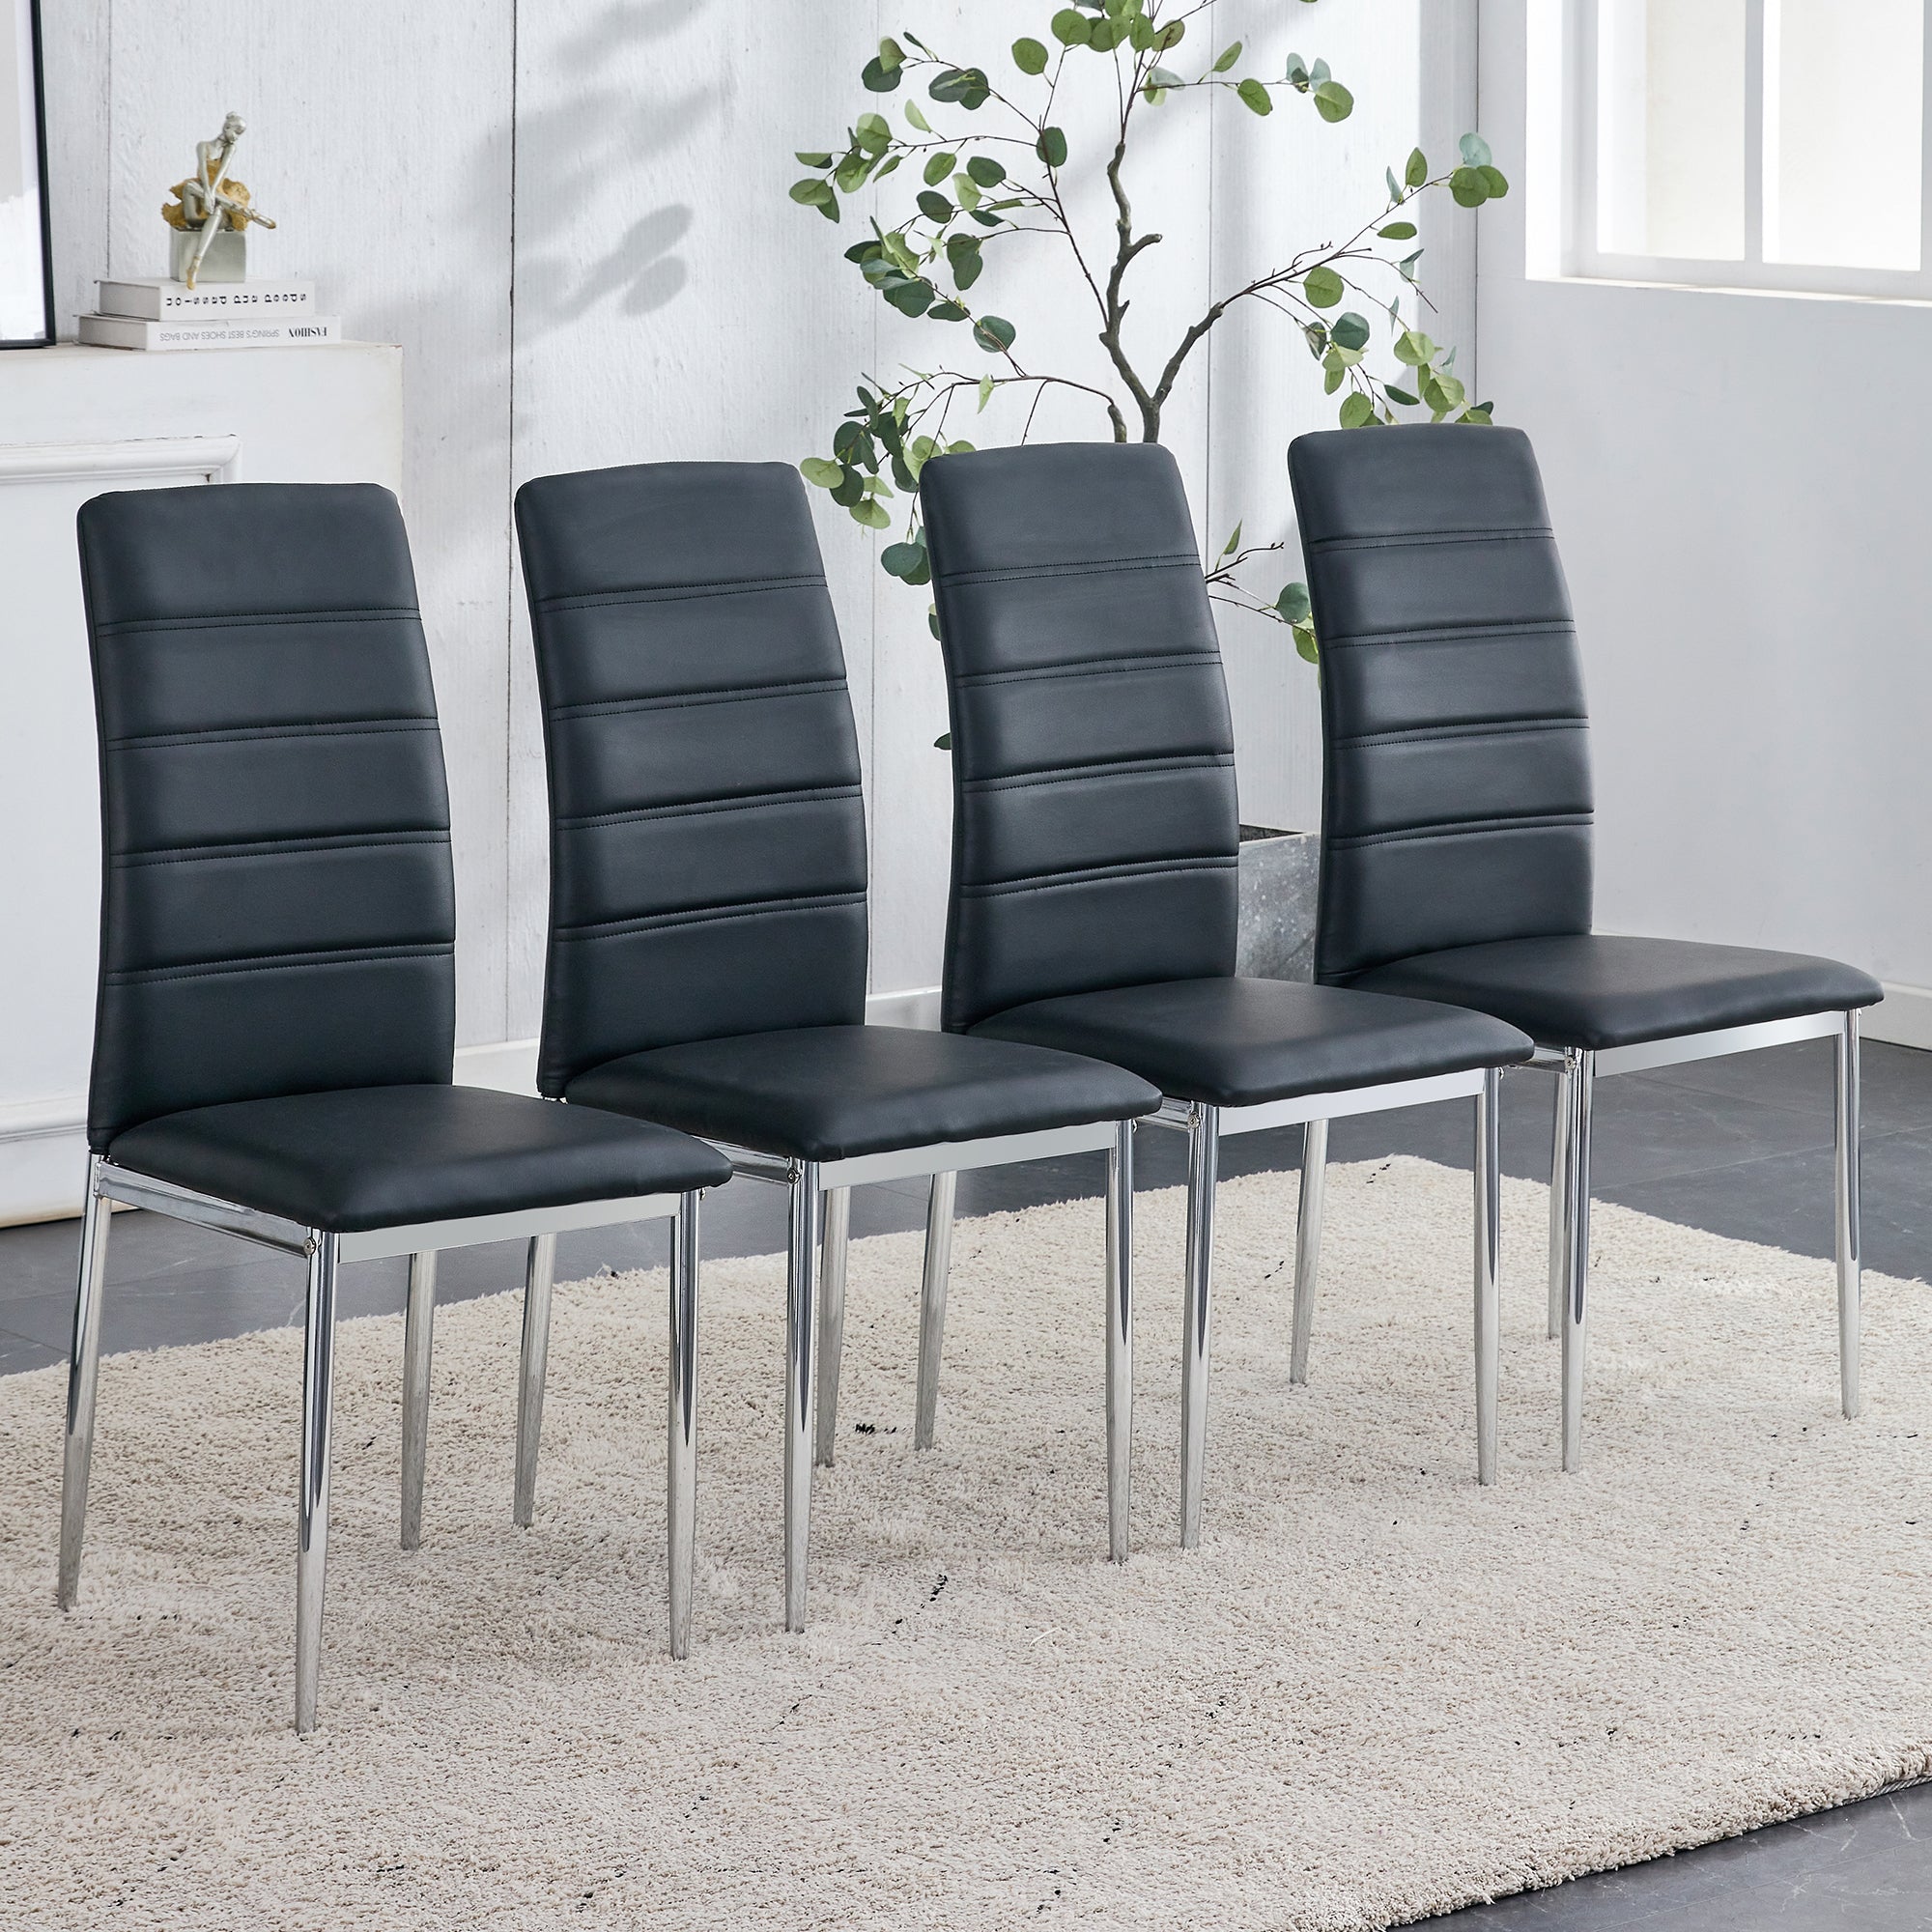 Set of 4 Pieces Black Faux Leather Dining Chair with Chromed Legs